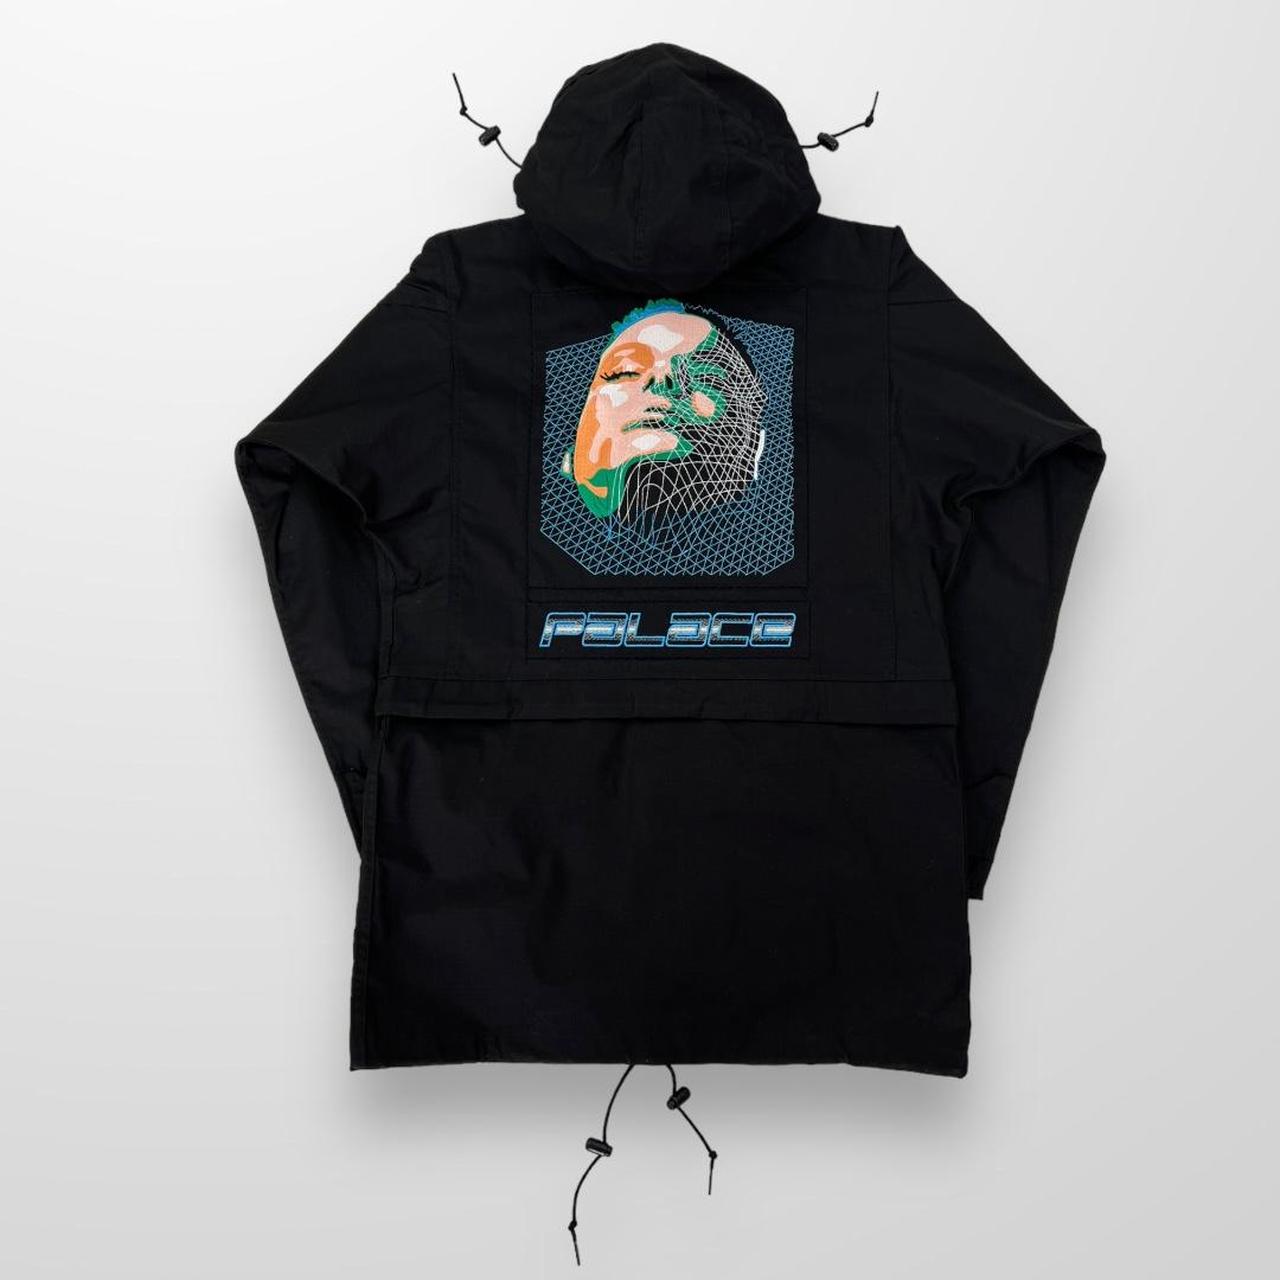 Palace Ark Air Unlined Smock Jacket In Black W/ Dreamscape Picture On Back